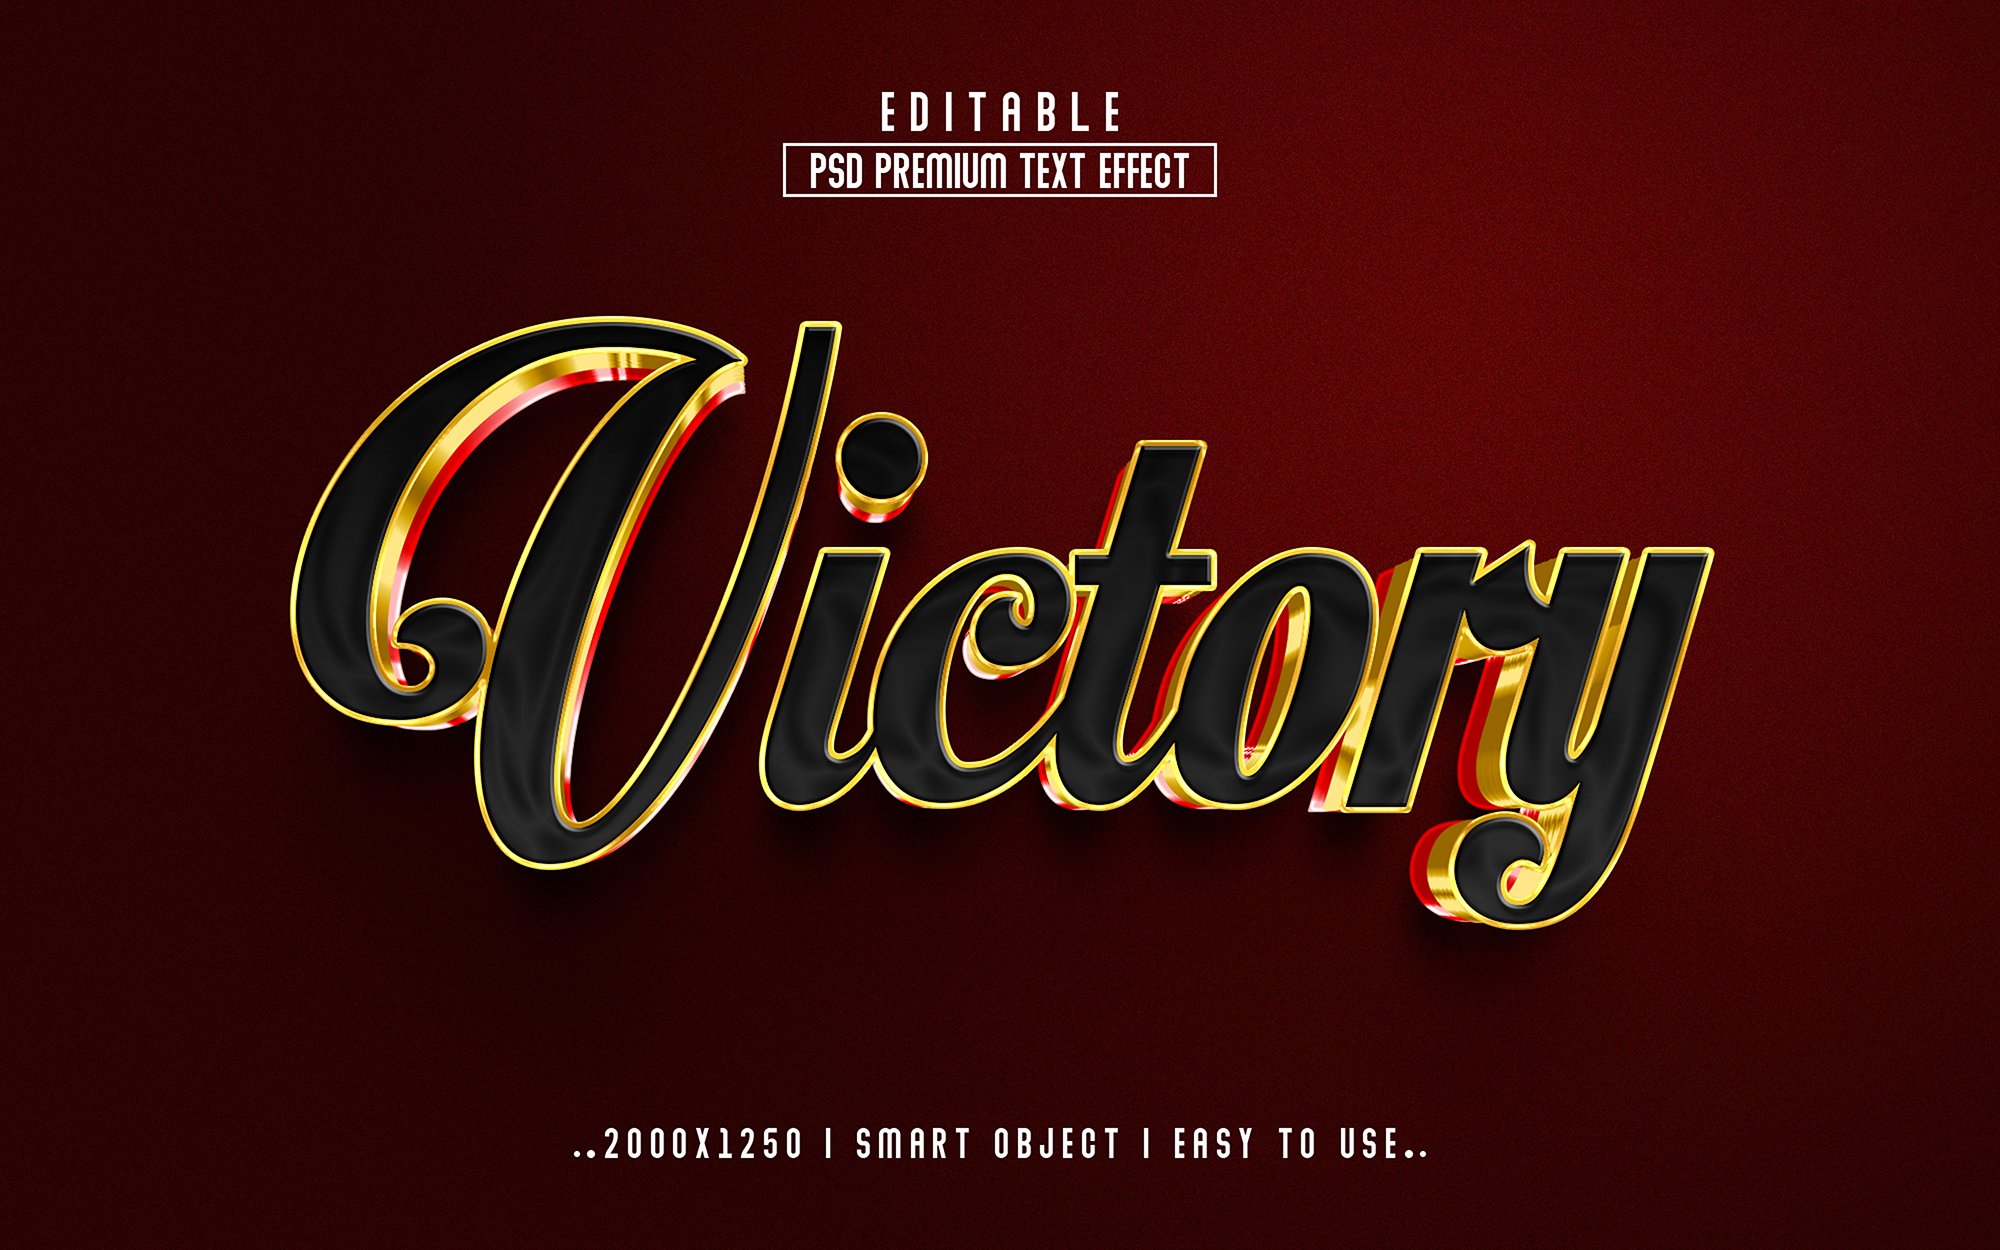 Red background with gold lettering that says victory.